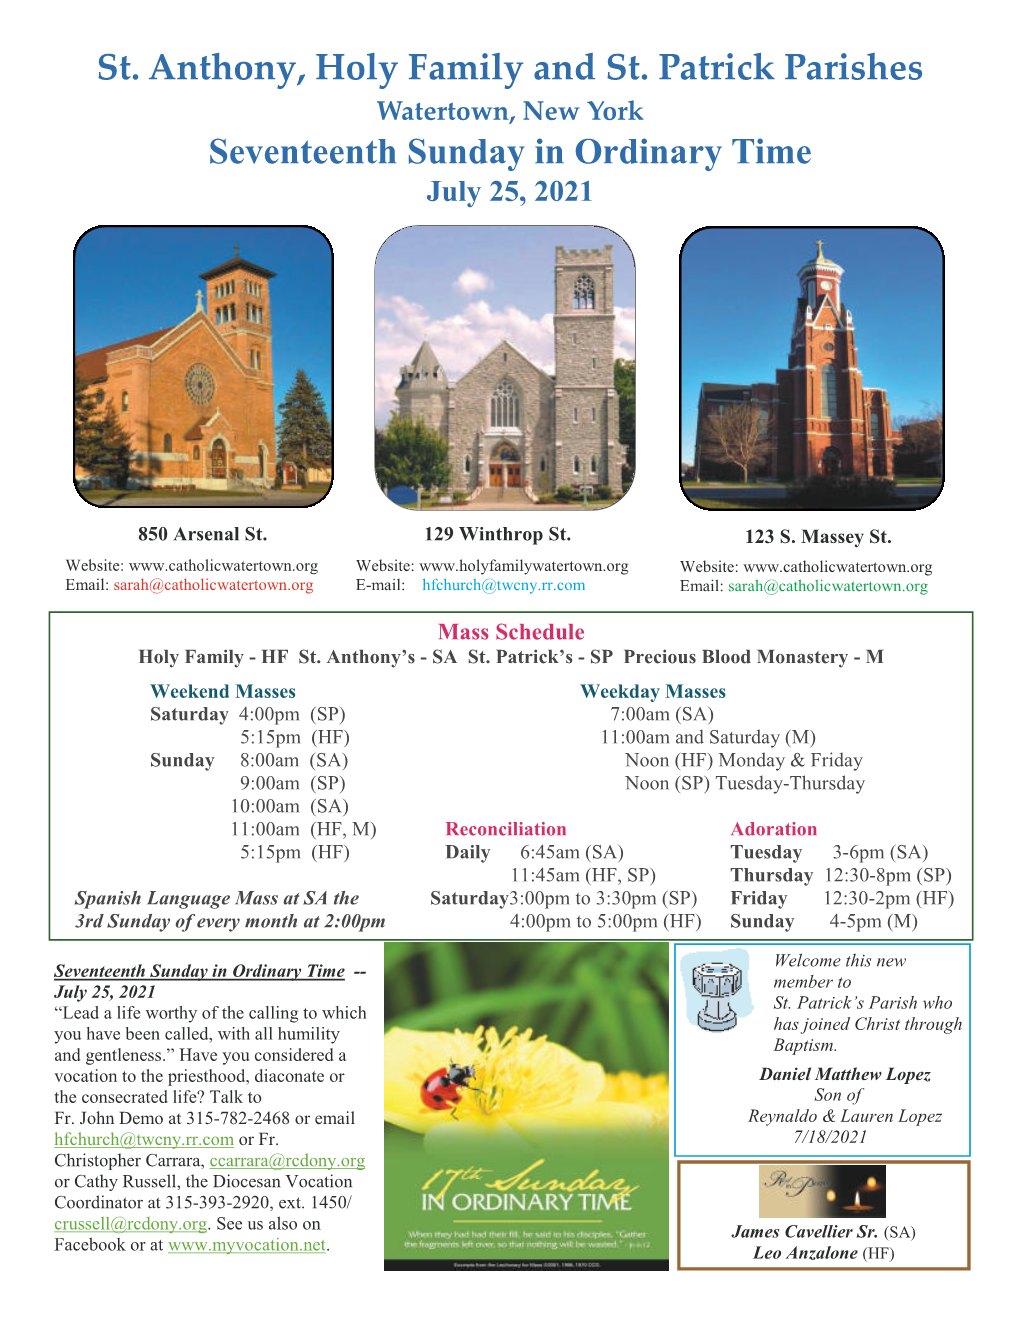 St. Anthony, Holy Family and St. Patrick Parishes Seventeenth